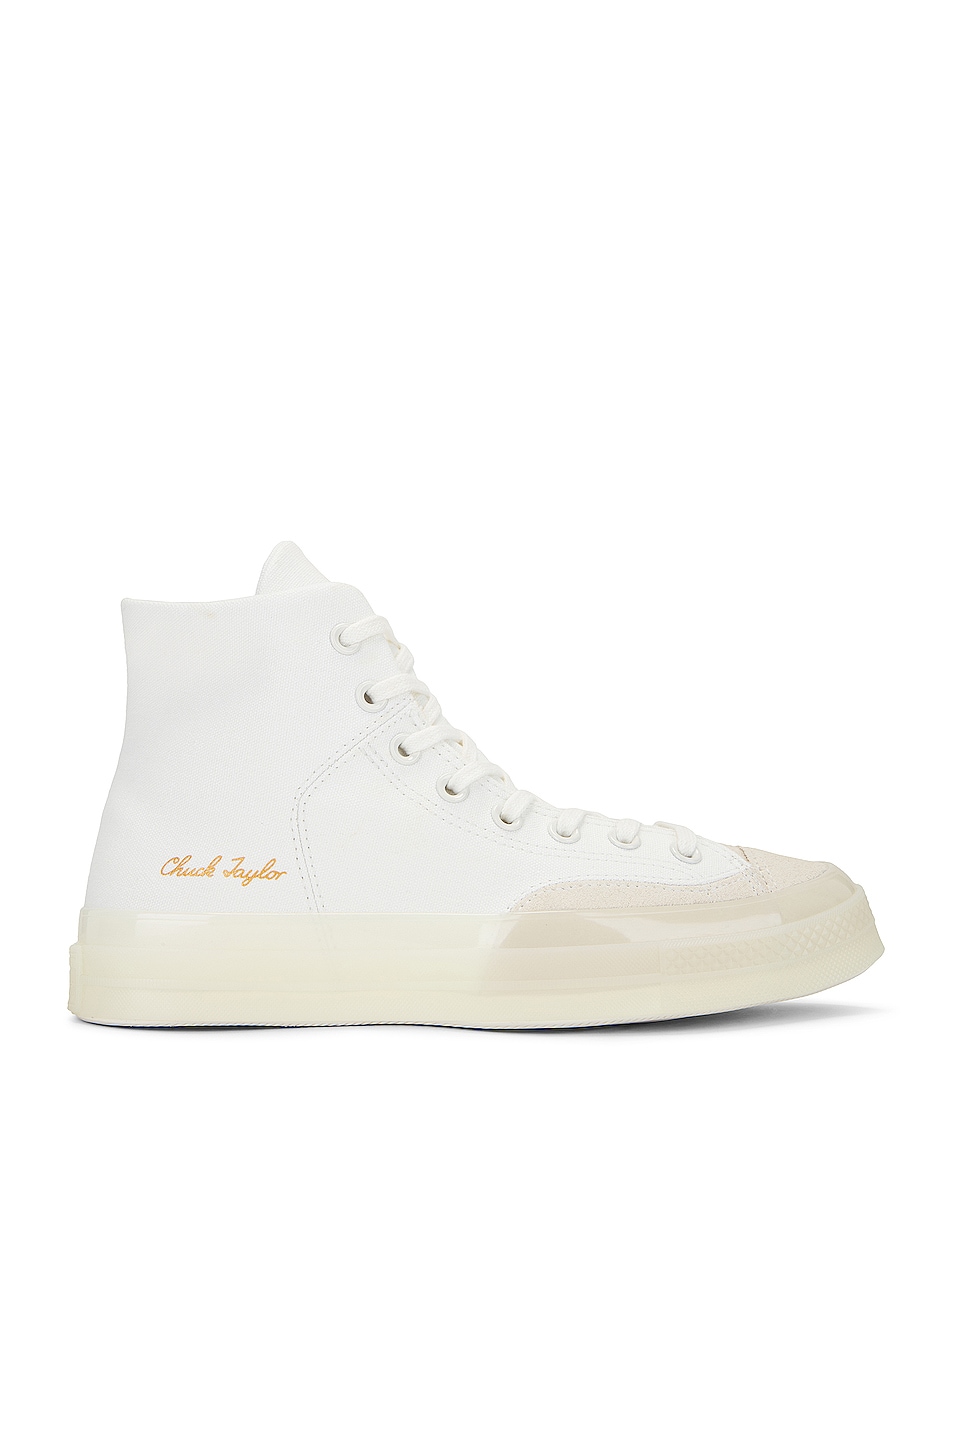 Кроссовки Converse Chuck 70 Marquis Sportswear In Vintage White/Natural Ivory, цвет VINTAGE WHITE & NATURAL IVORY